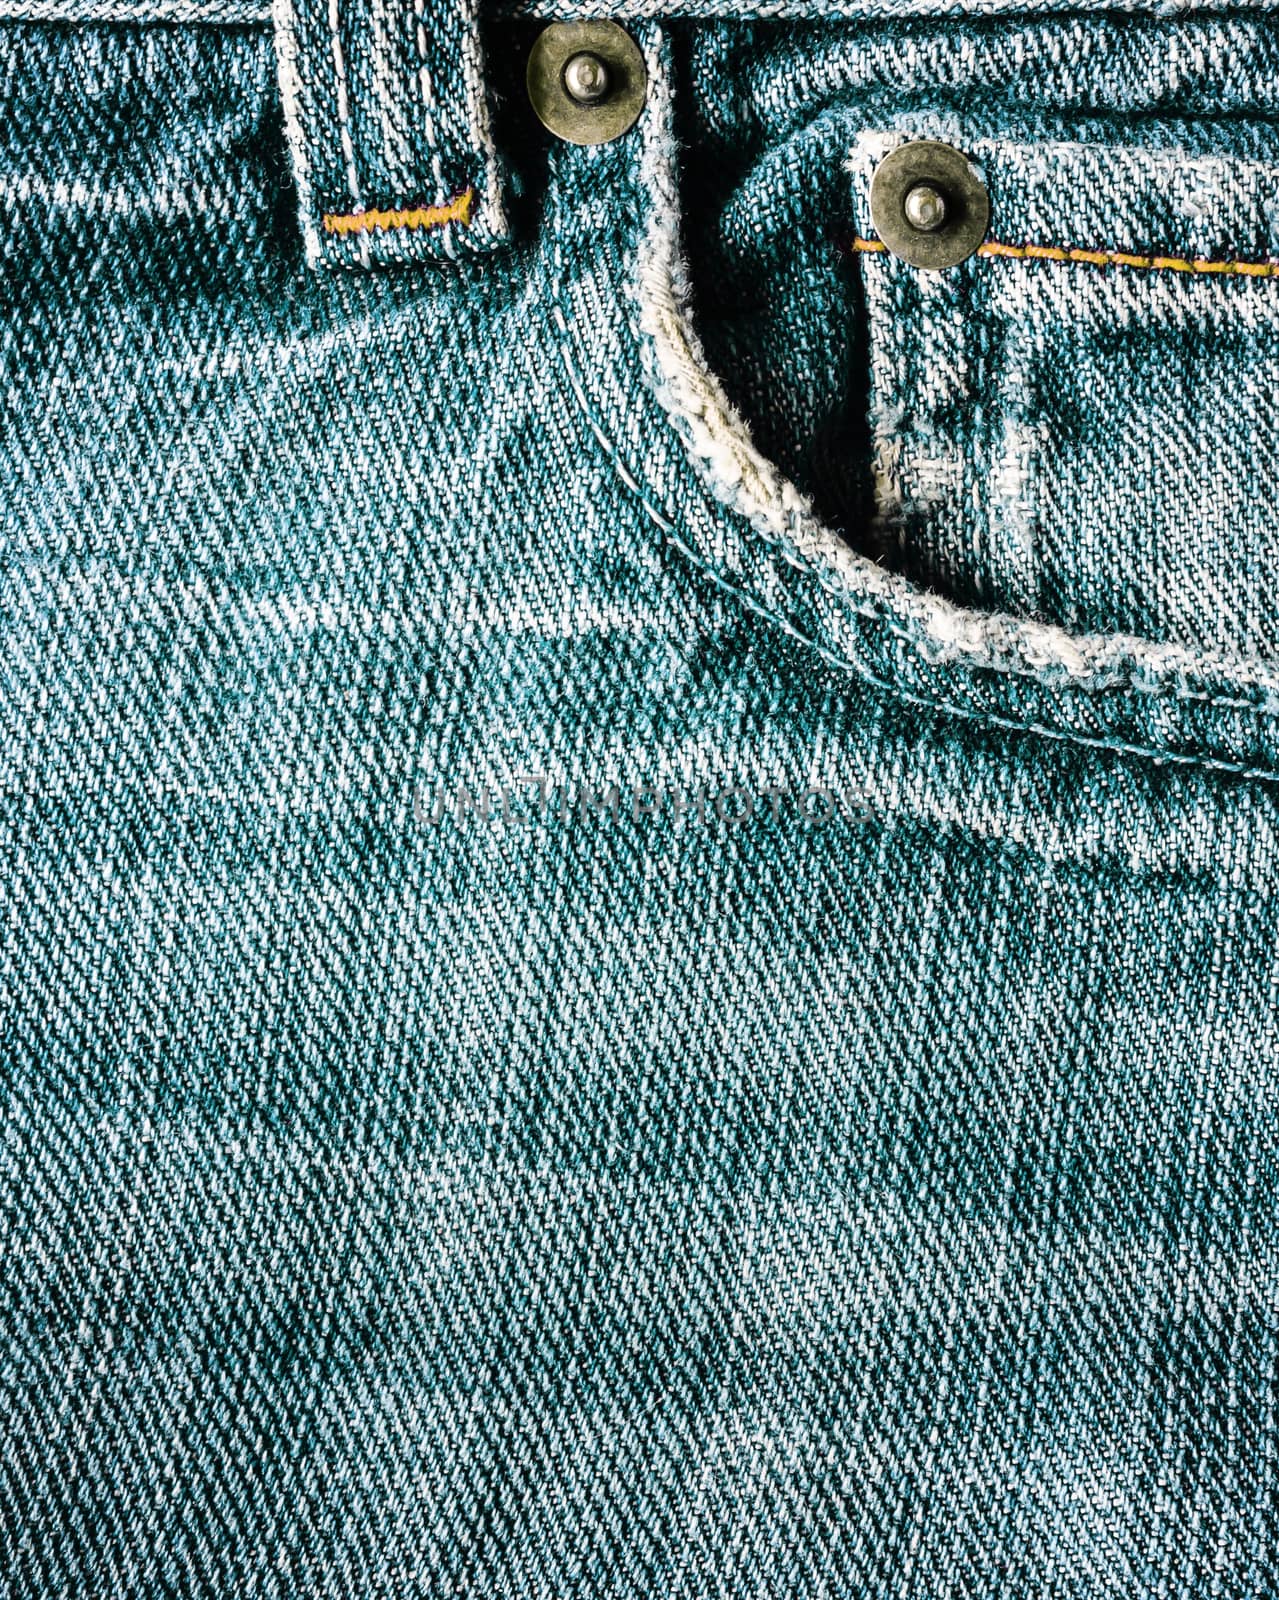 Jeans close-up, old, pocket back, front, crumpled, ragged. by Tanacha